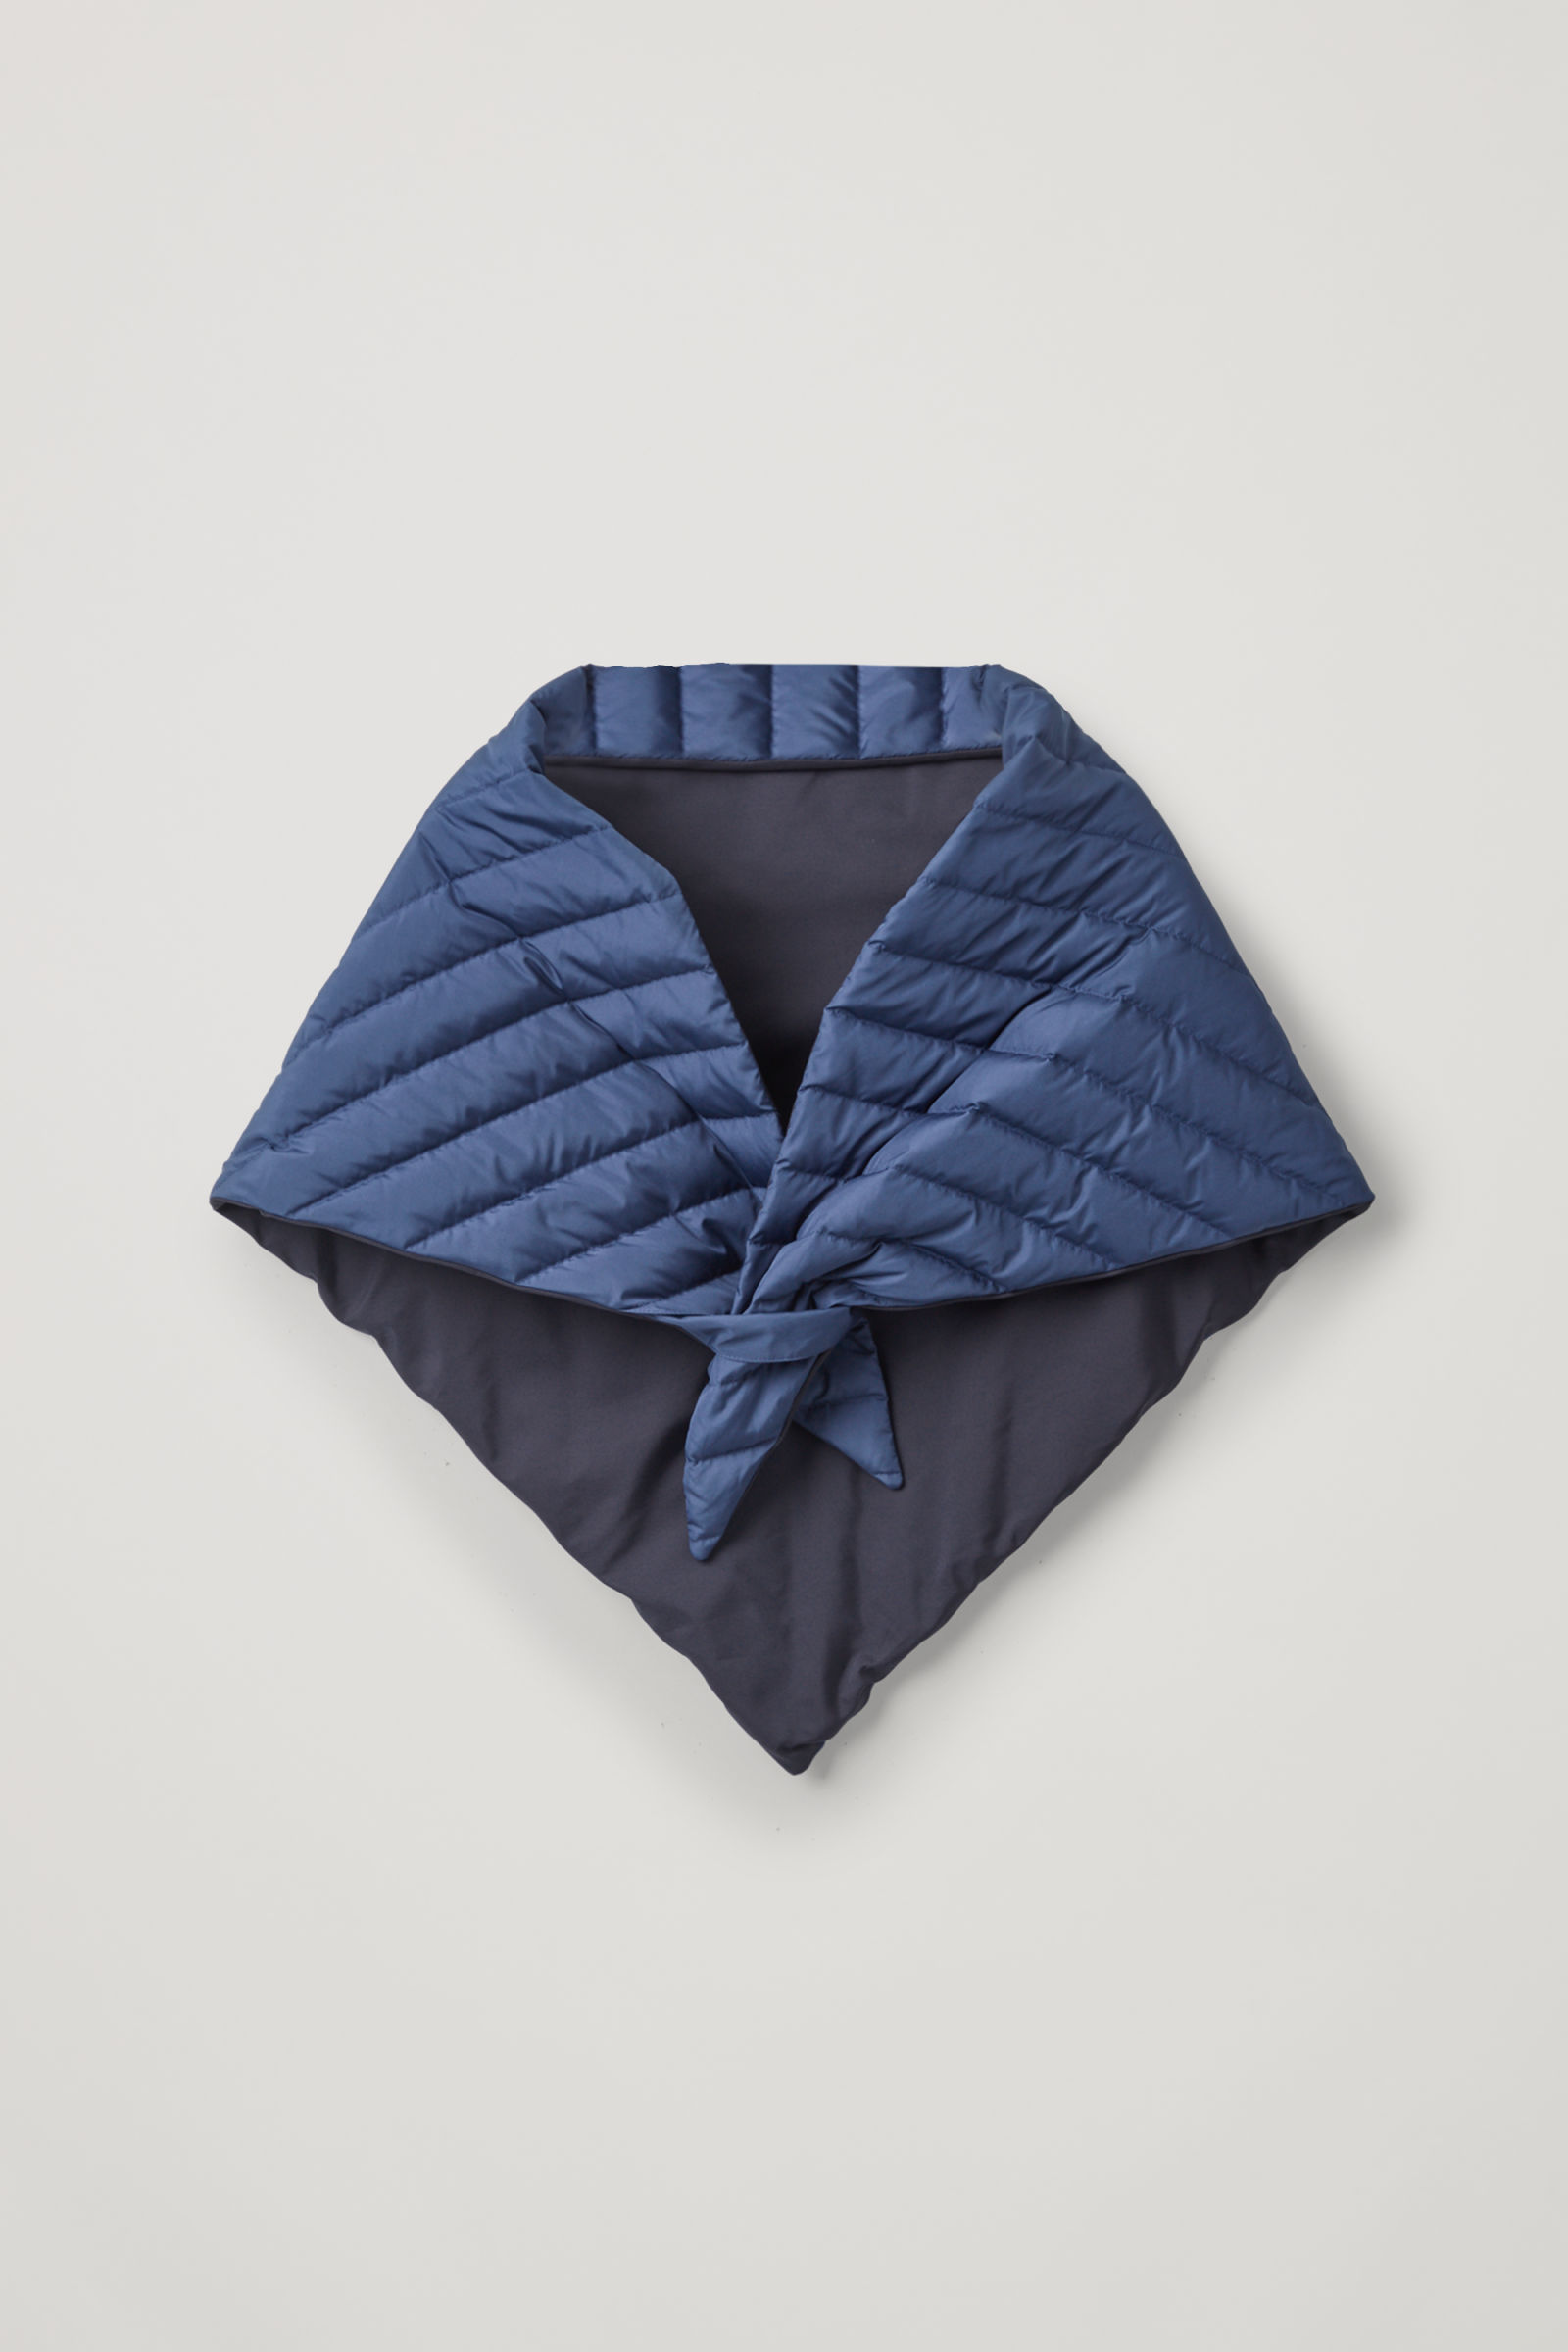 COS + Padded Triangle Scarf